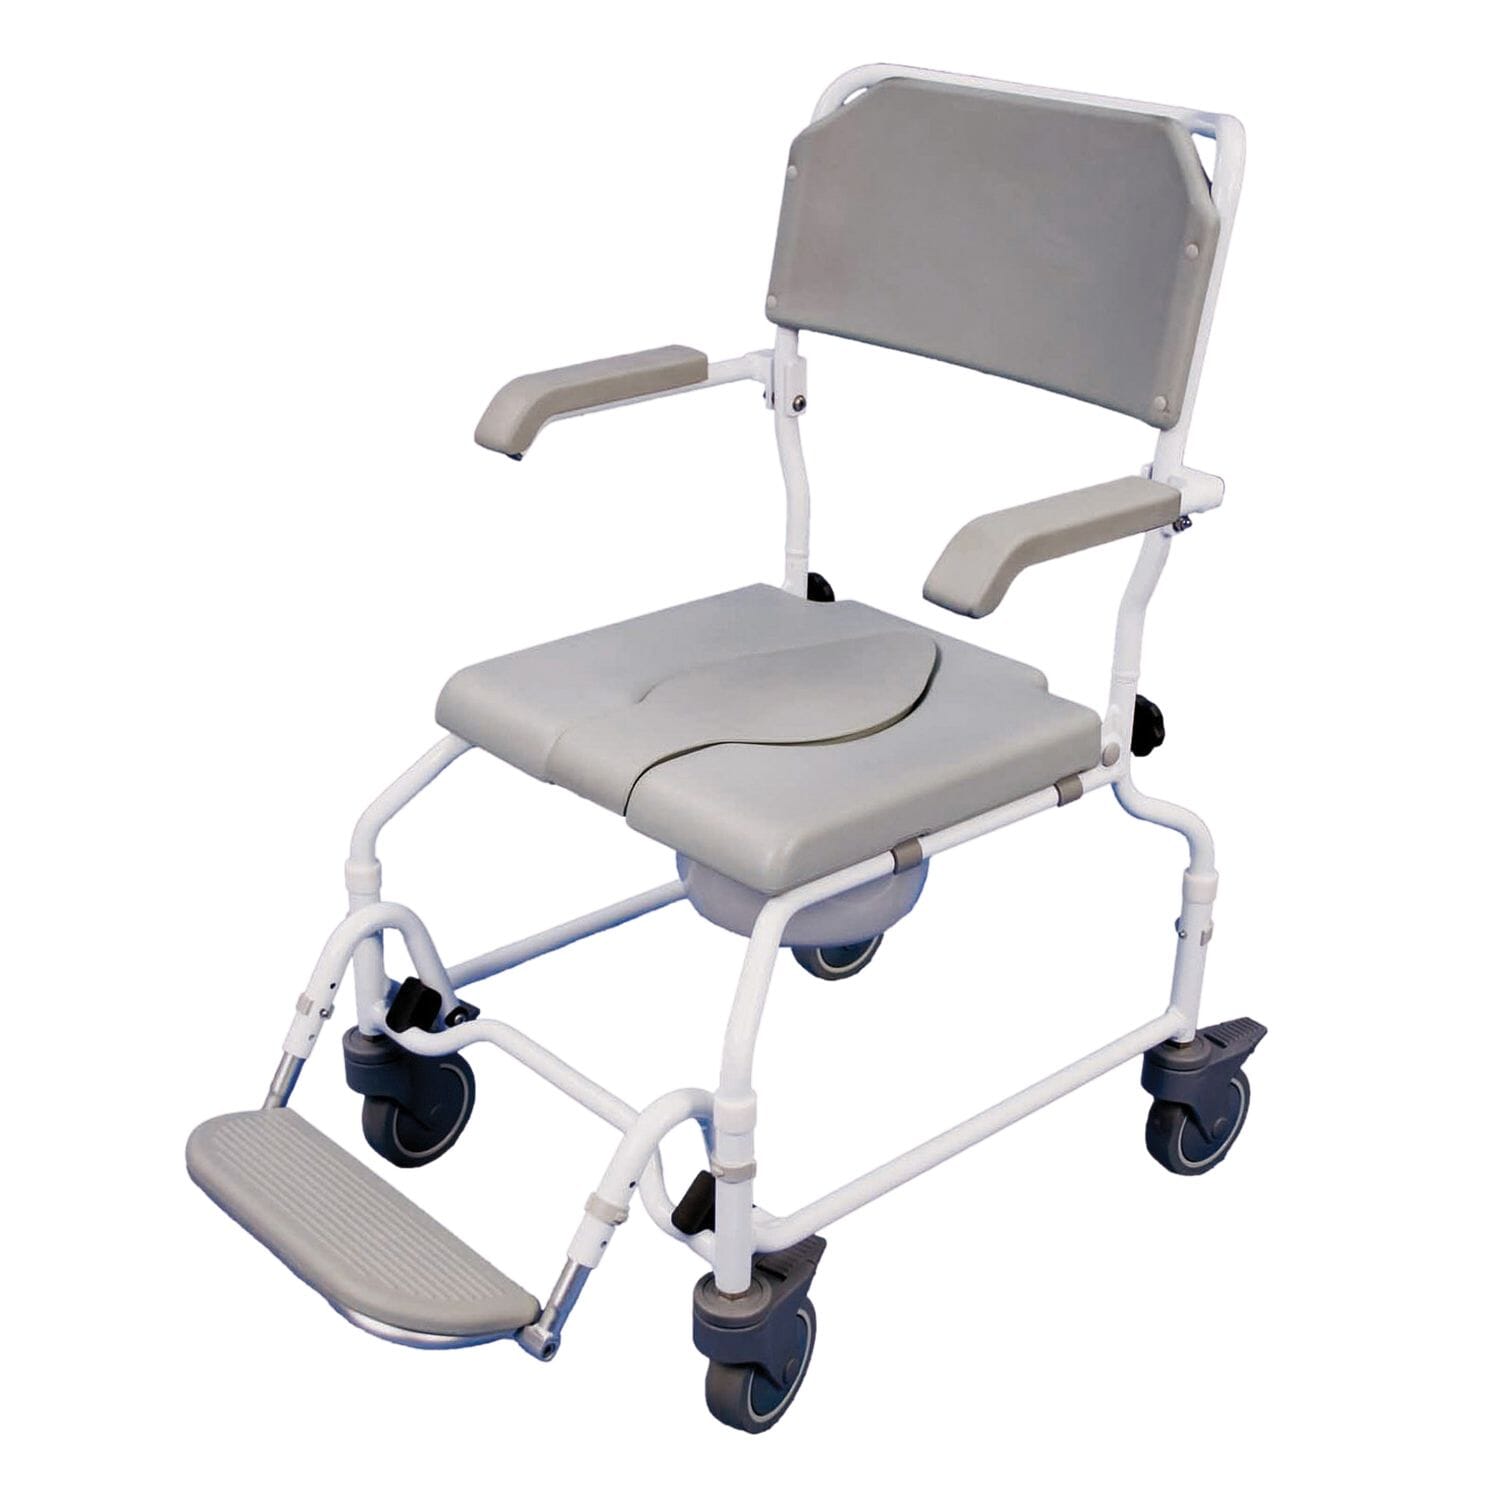 View Bewl Adjustable Height Shower Commode Chair information